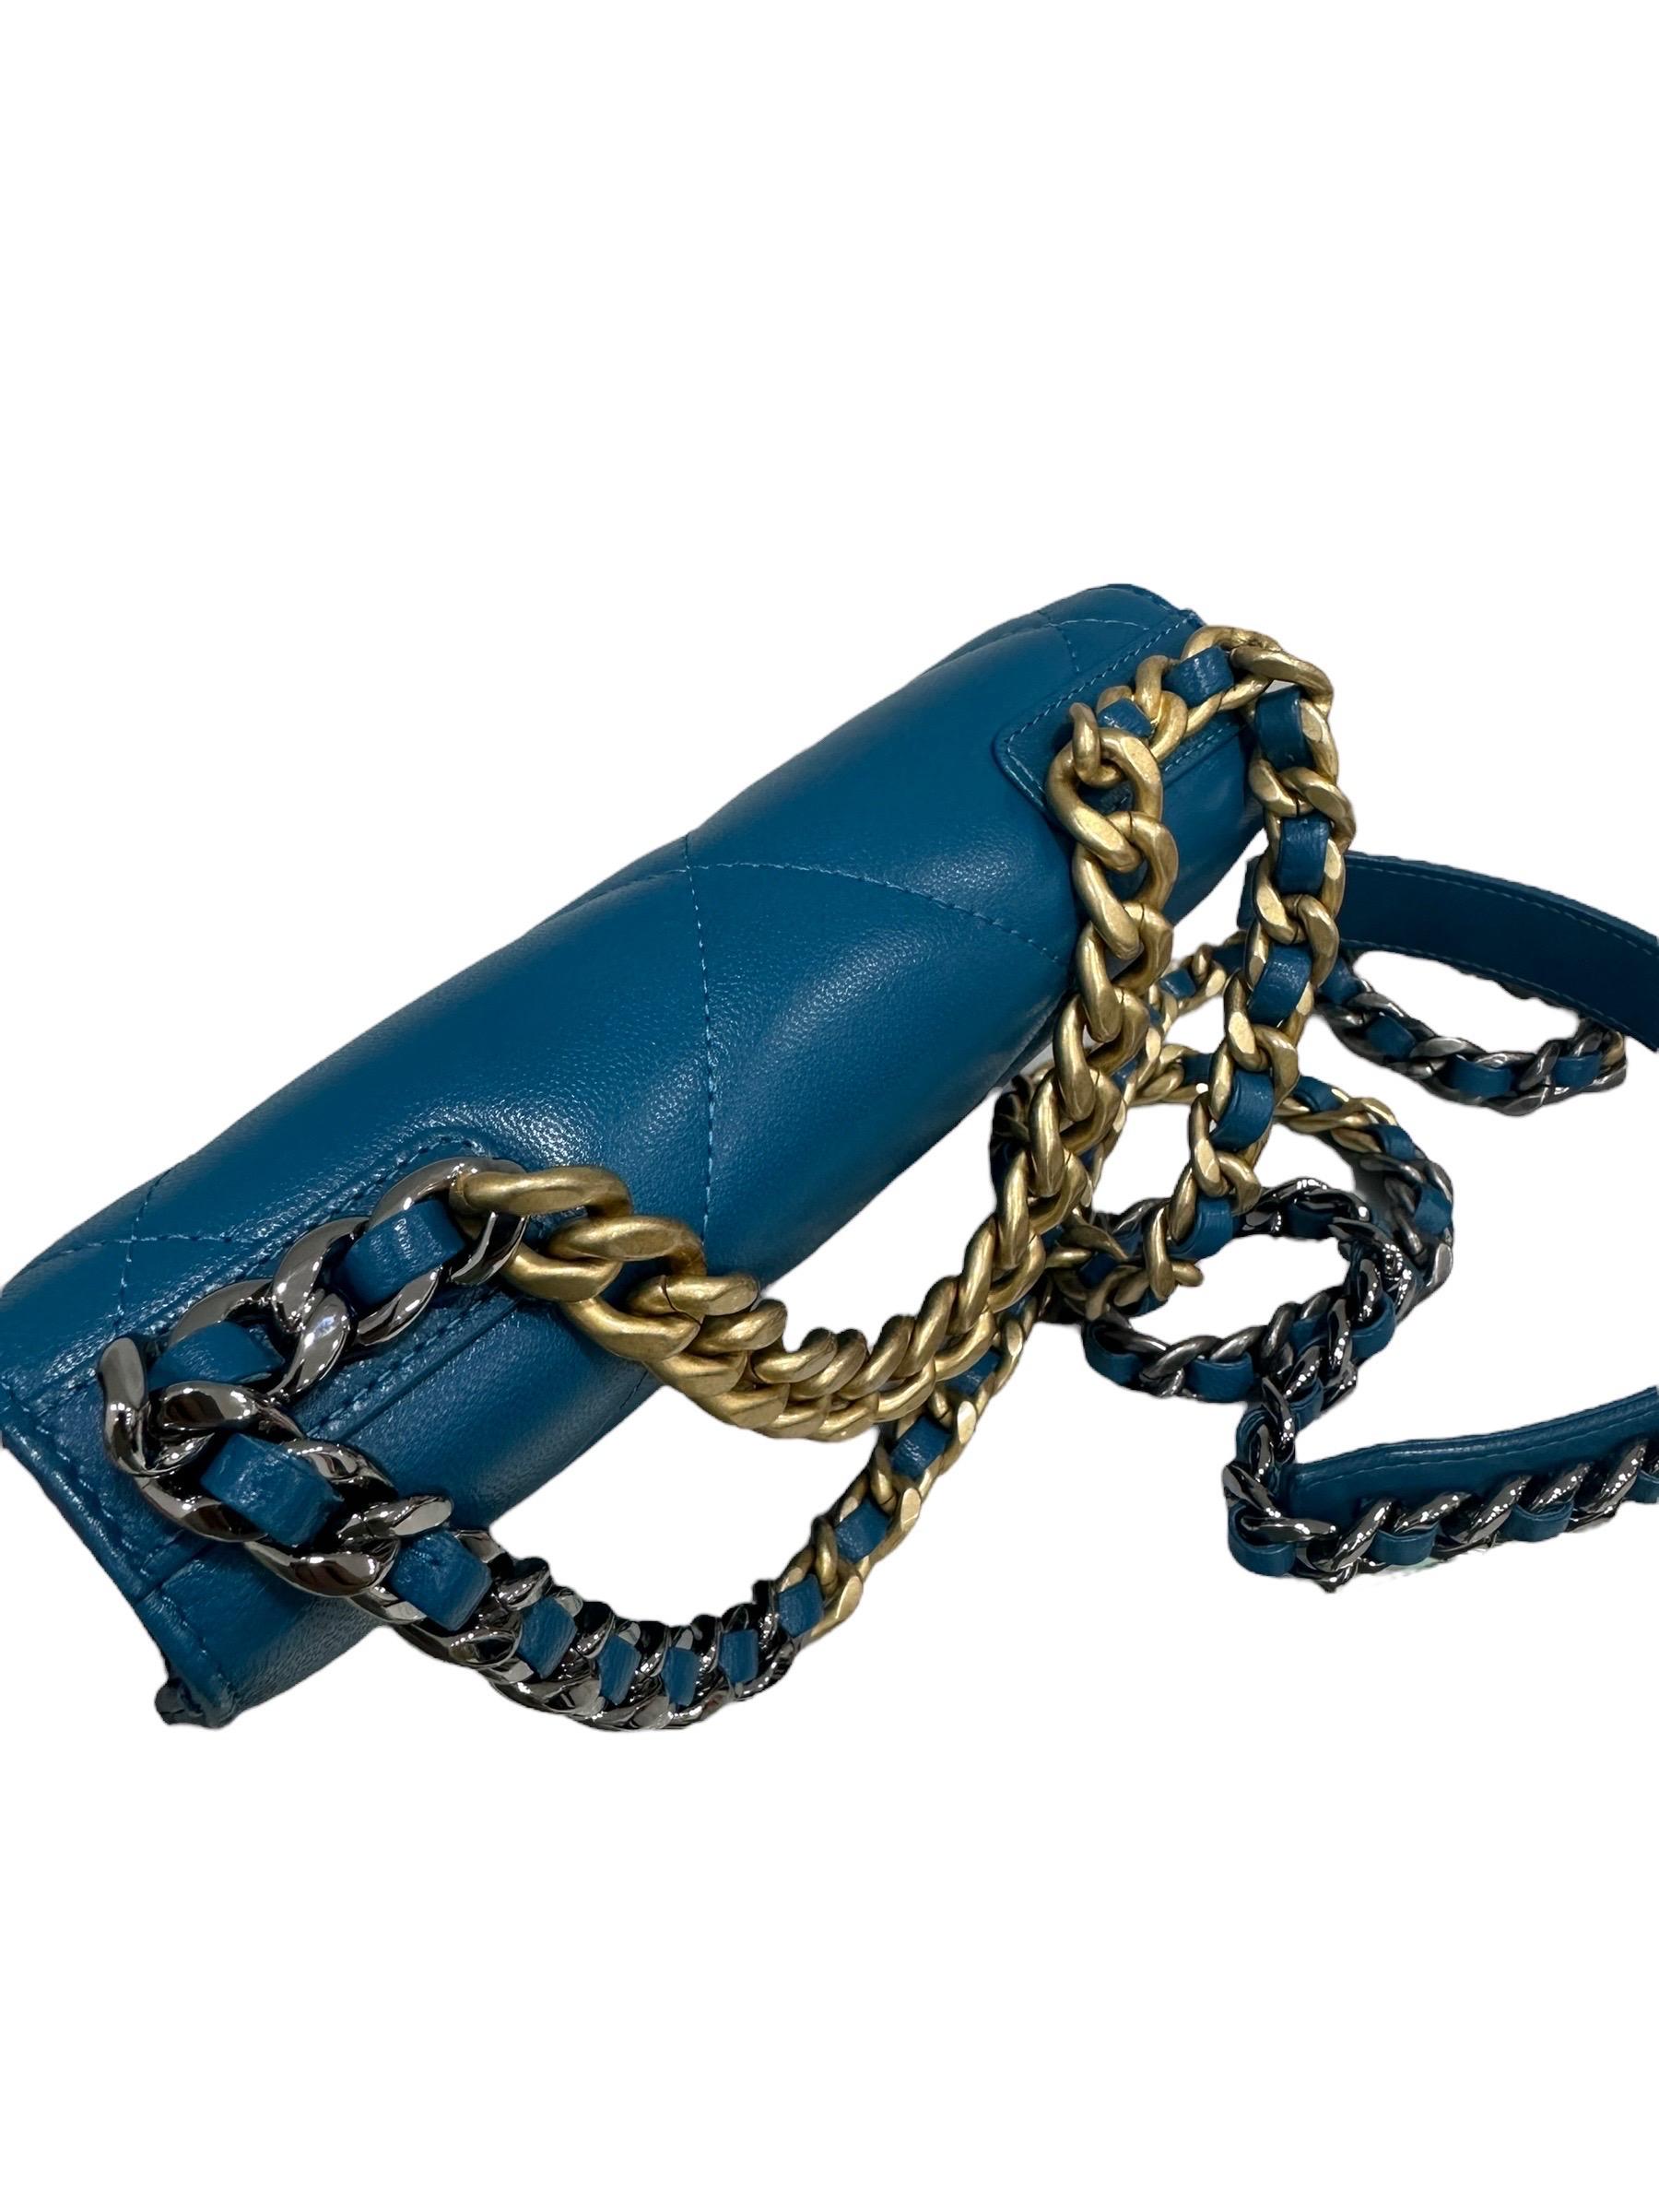 2021 Chanel 19 Wallet On Chain Blue Leather 9